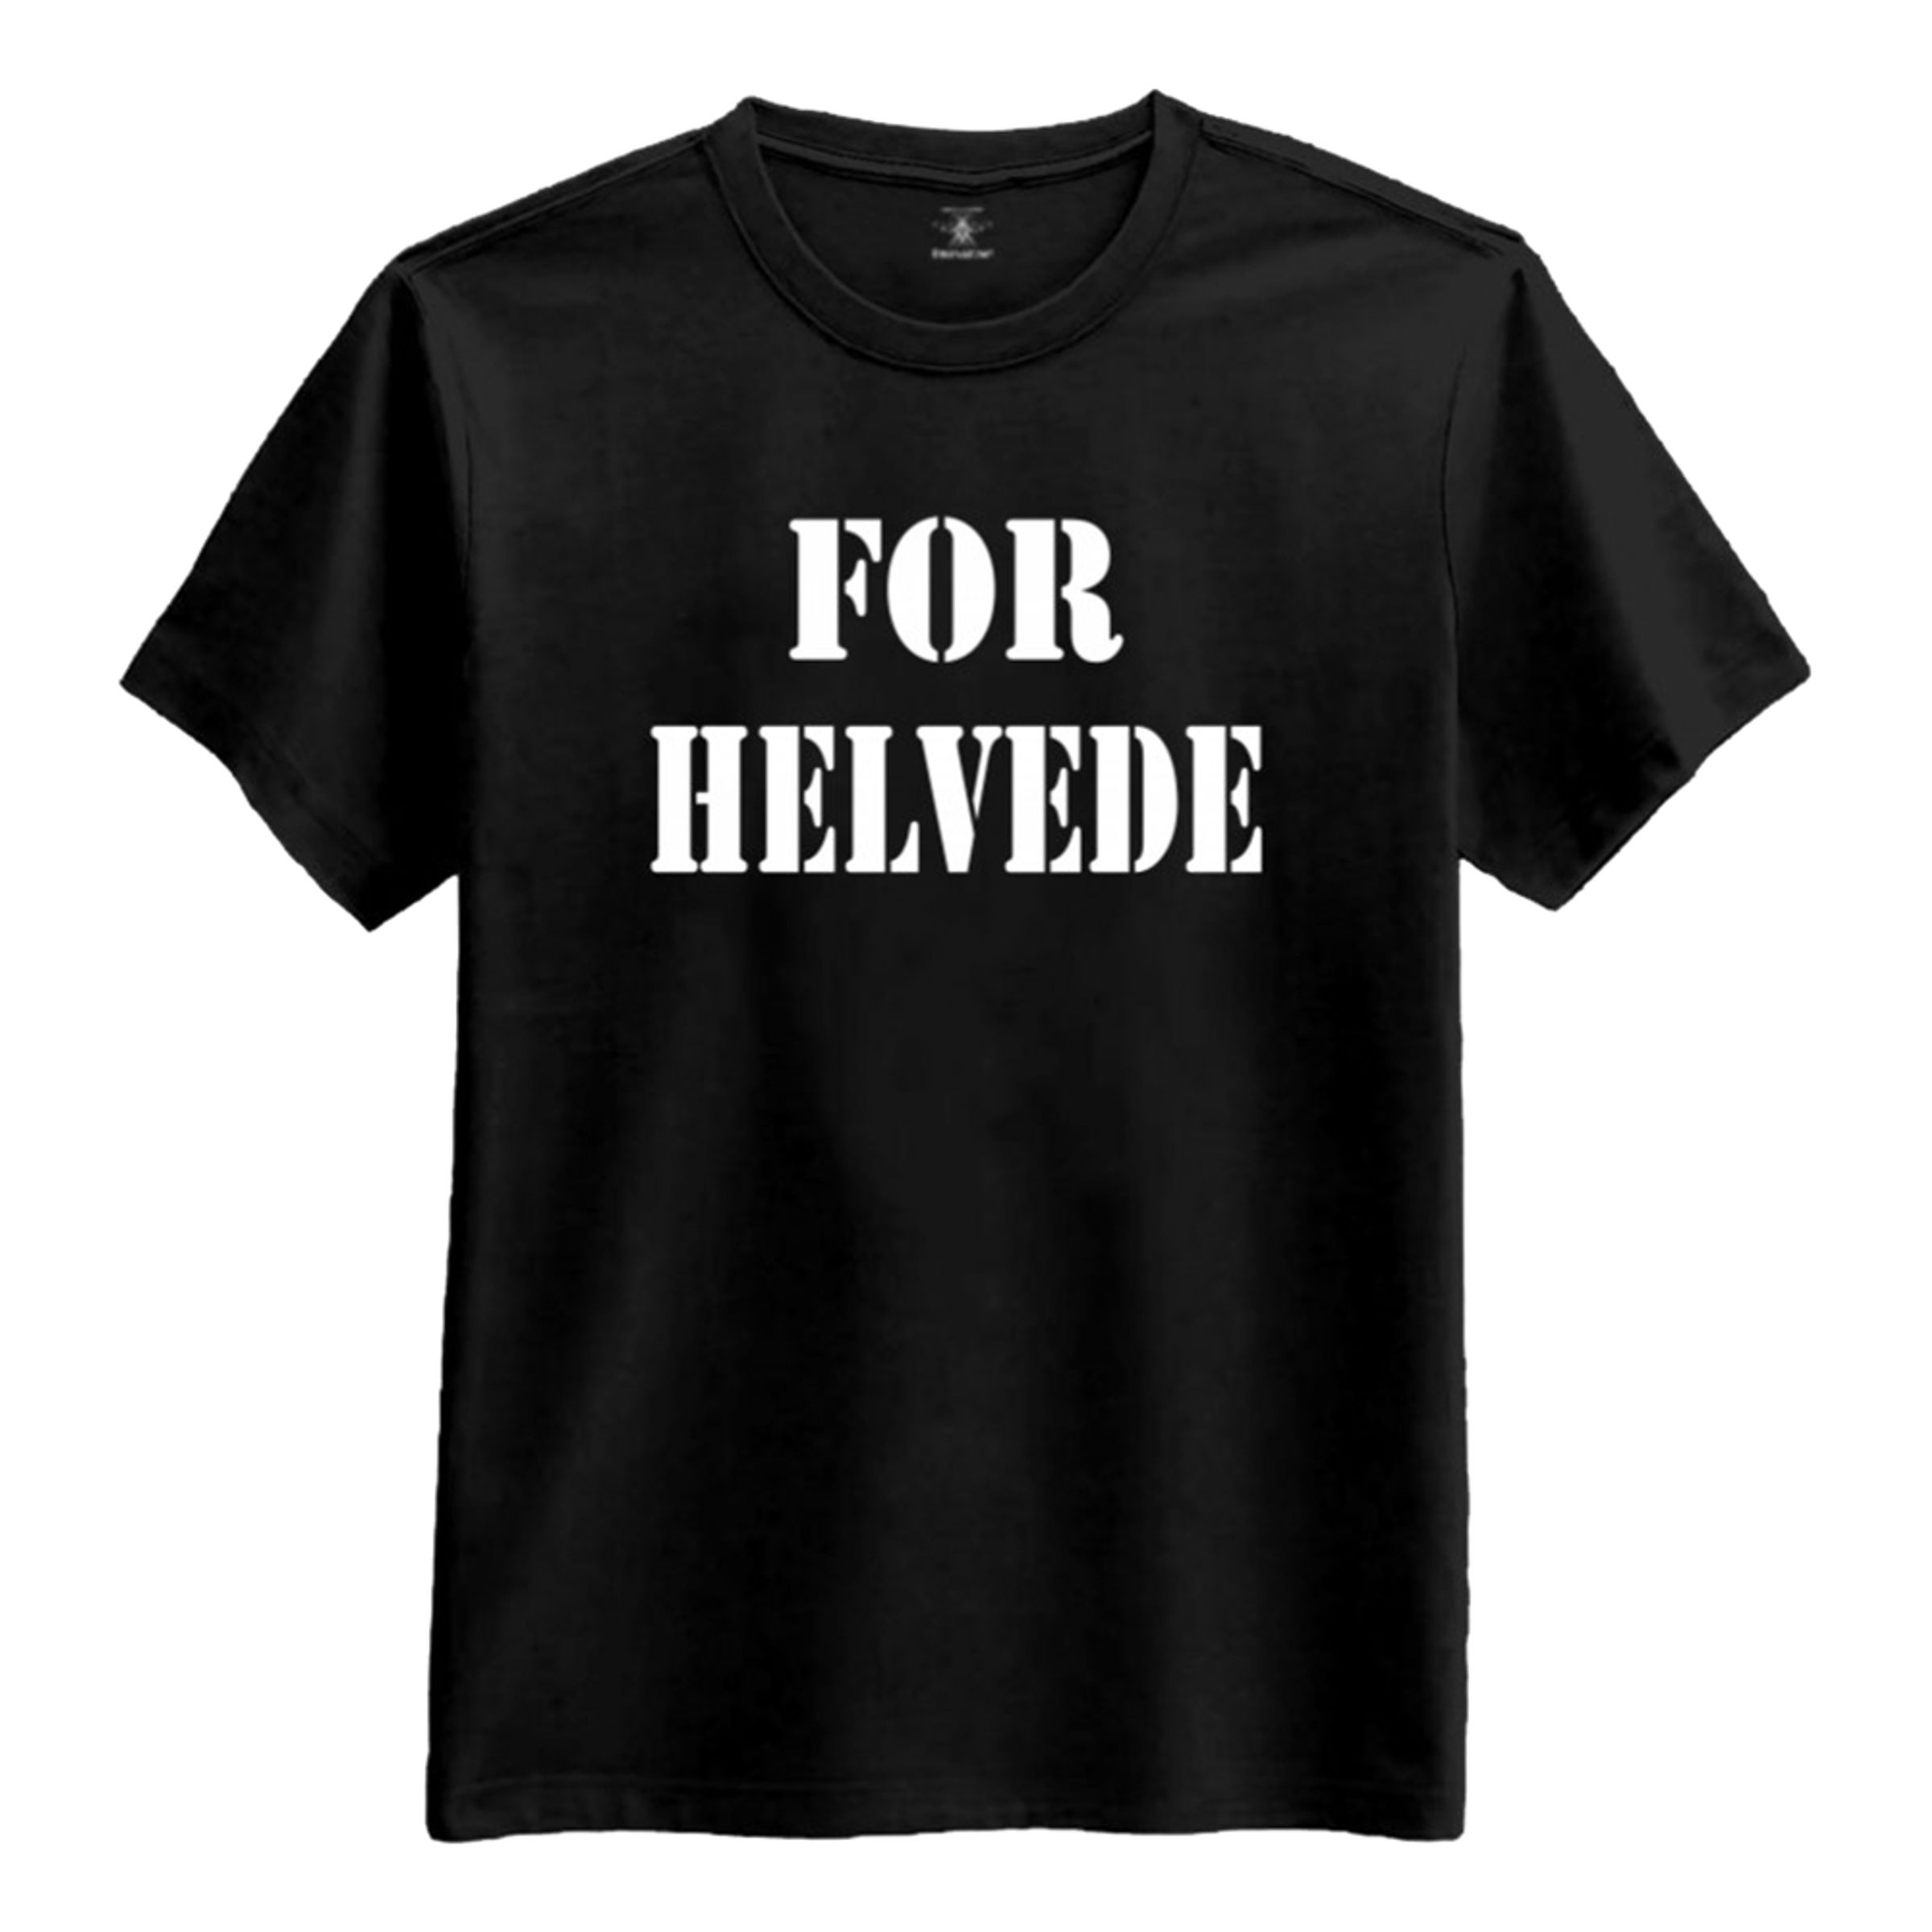 For Helvede T-shirt - Small